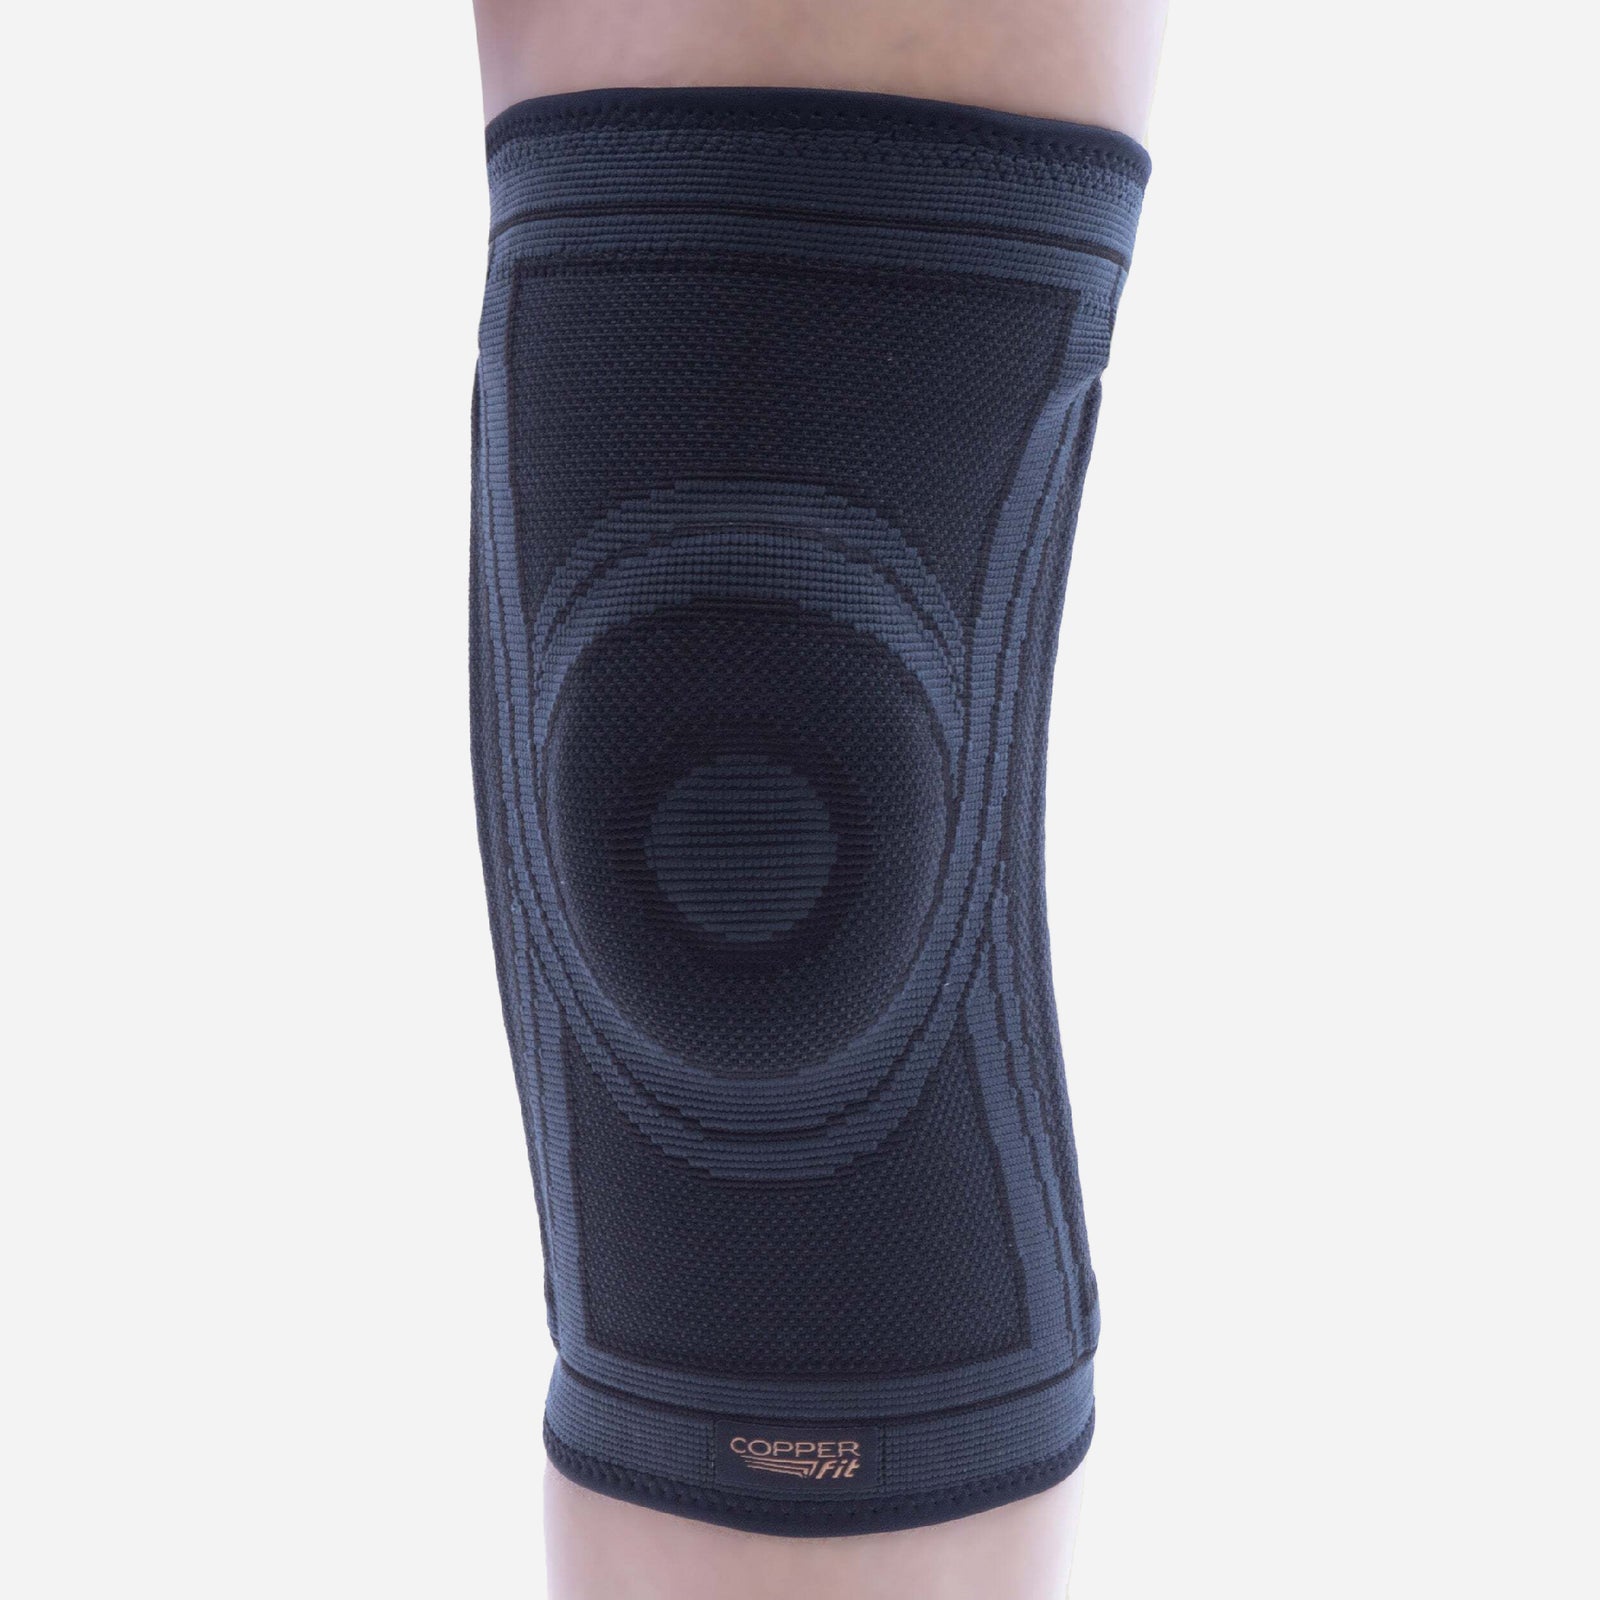 Leg Compression Sleeves & Products - Copper Fit